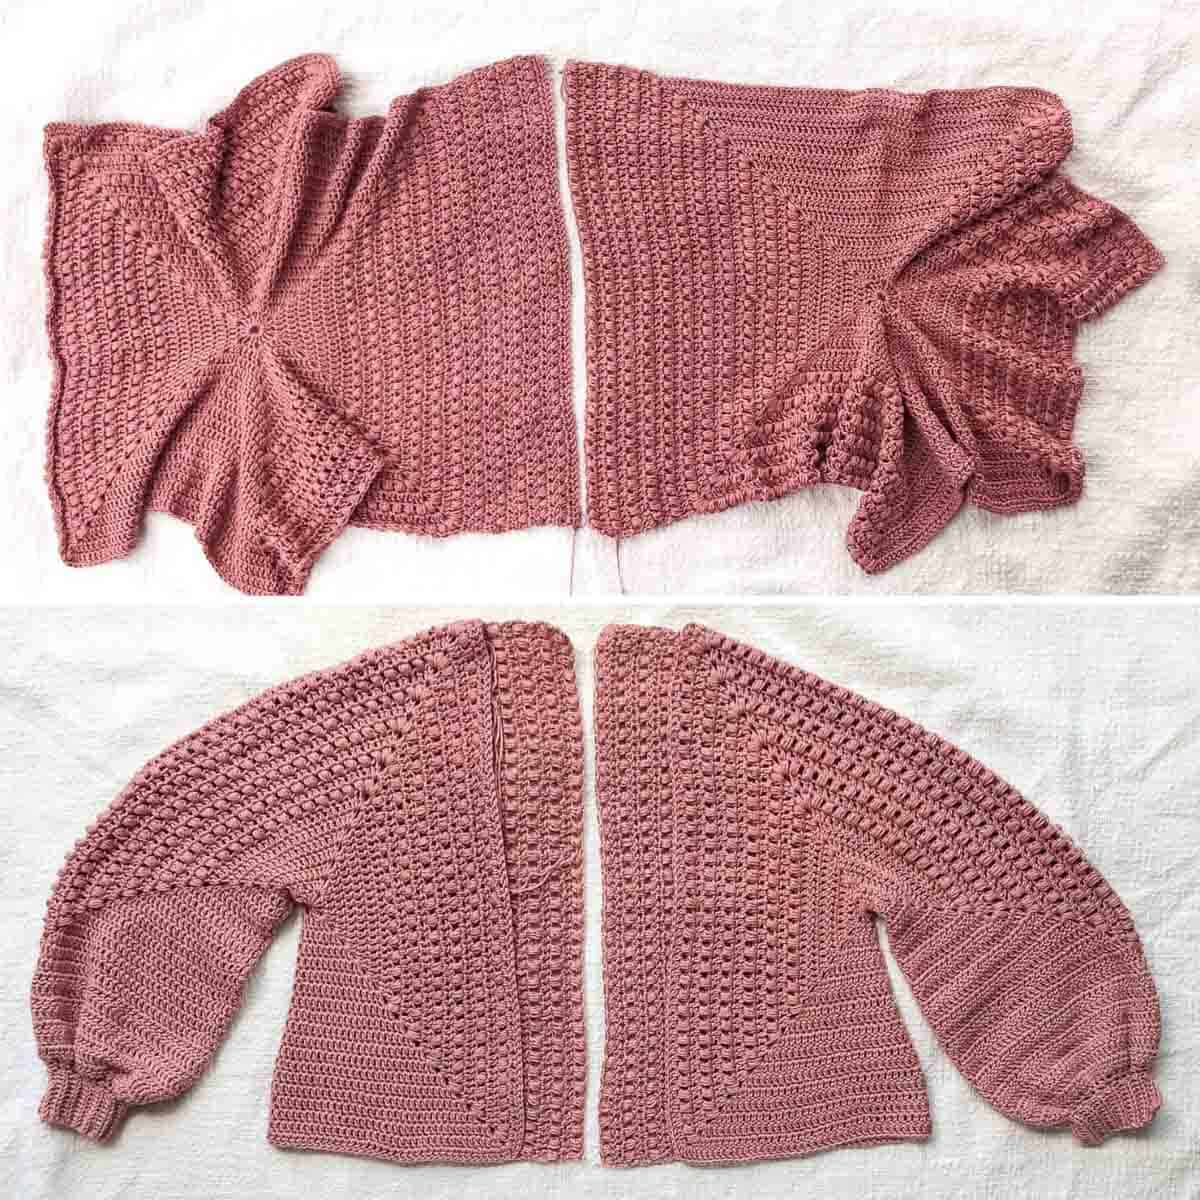 Two overhead views of crochet hexagons: laid out flat and folded into the sleeves and body of a crochet cardigan.